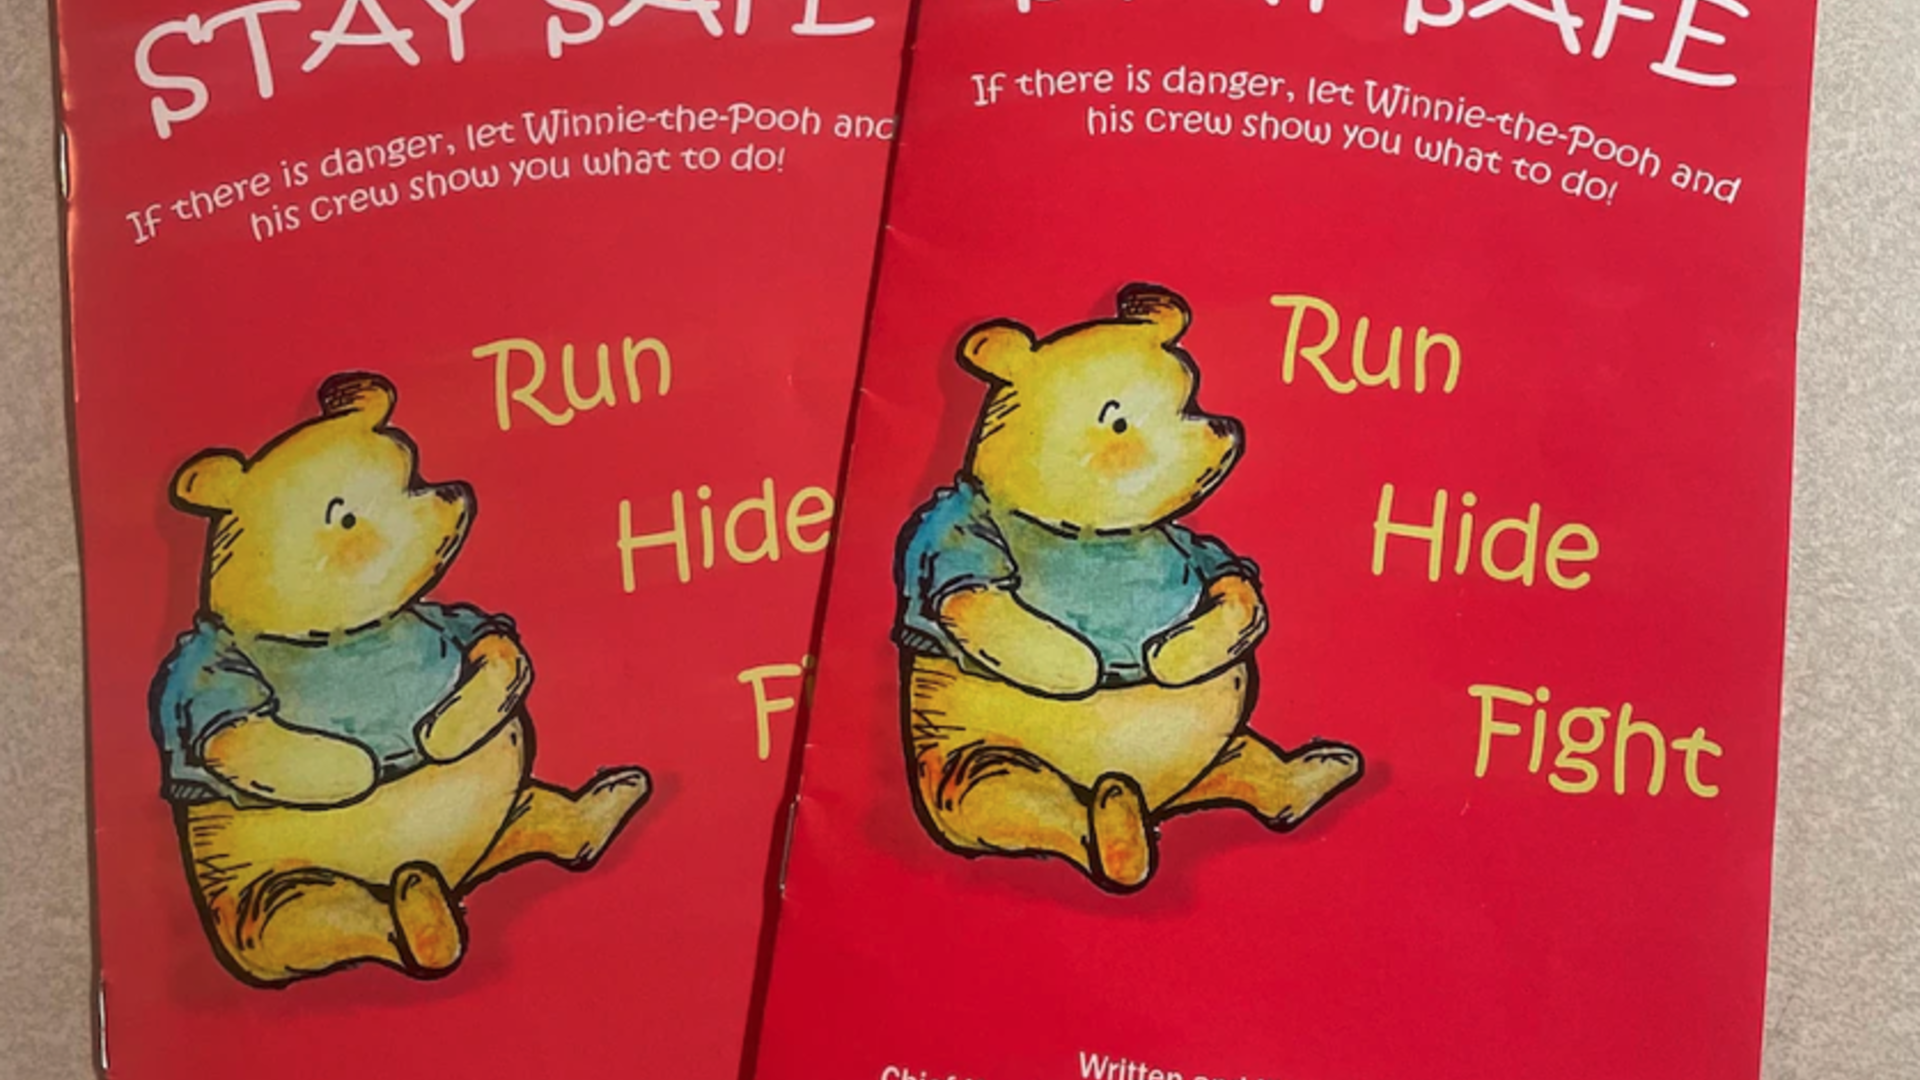 Parents and teachers in Texas are voicing concerns after students received Winnie-the-Pooh books advising them on active shooter situations.